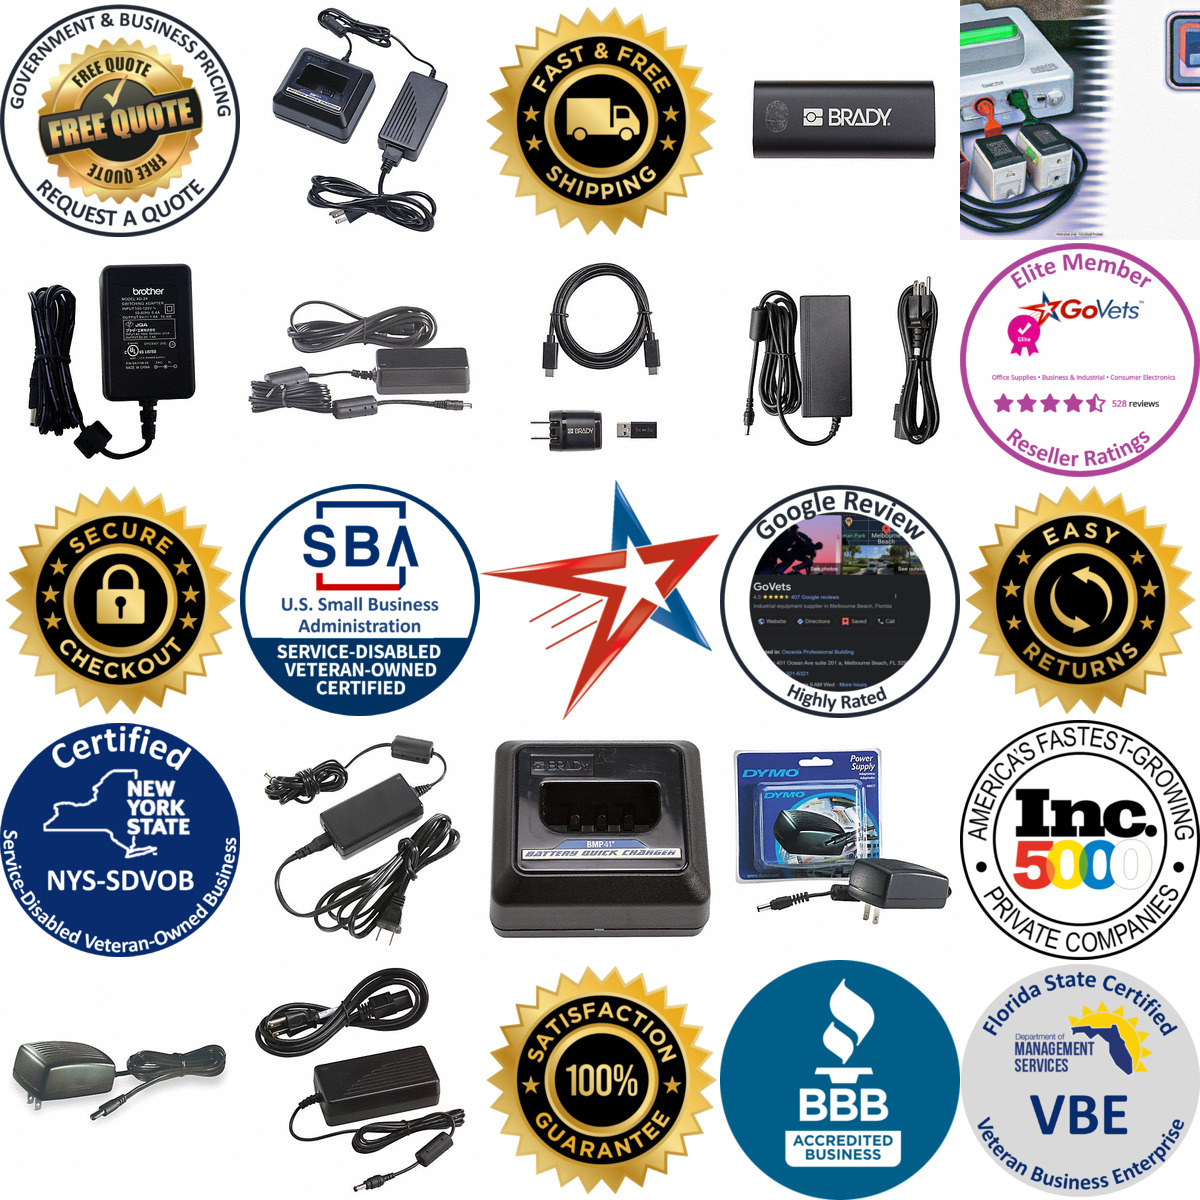 A selection of Label Maker Power Cables and Chargers products on GoVets